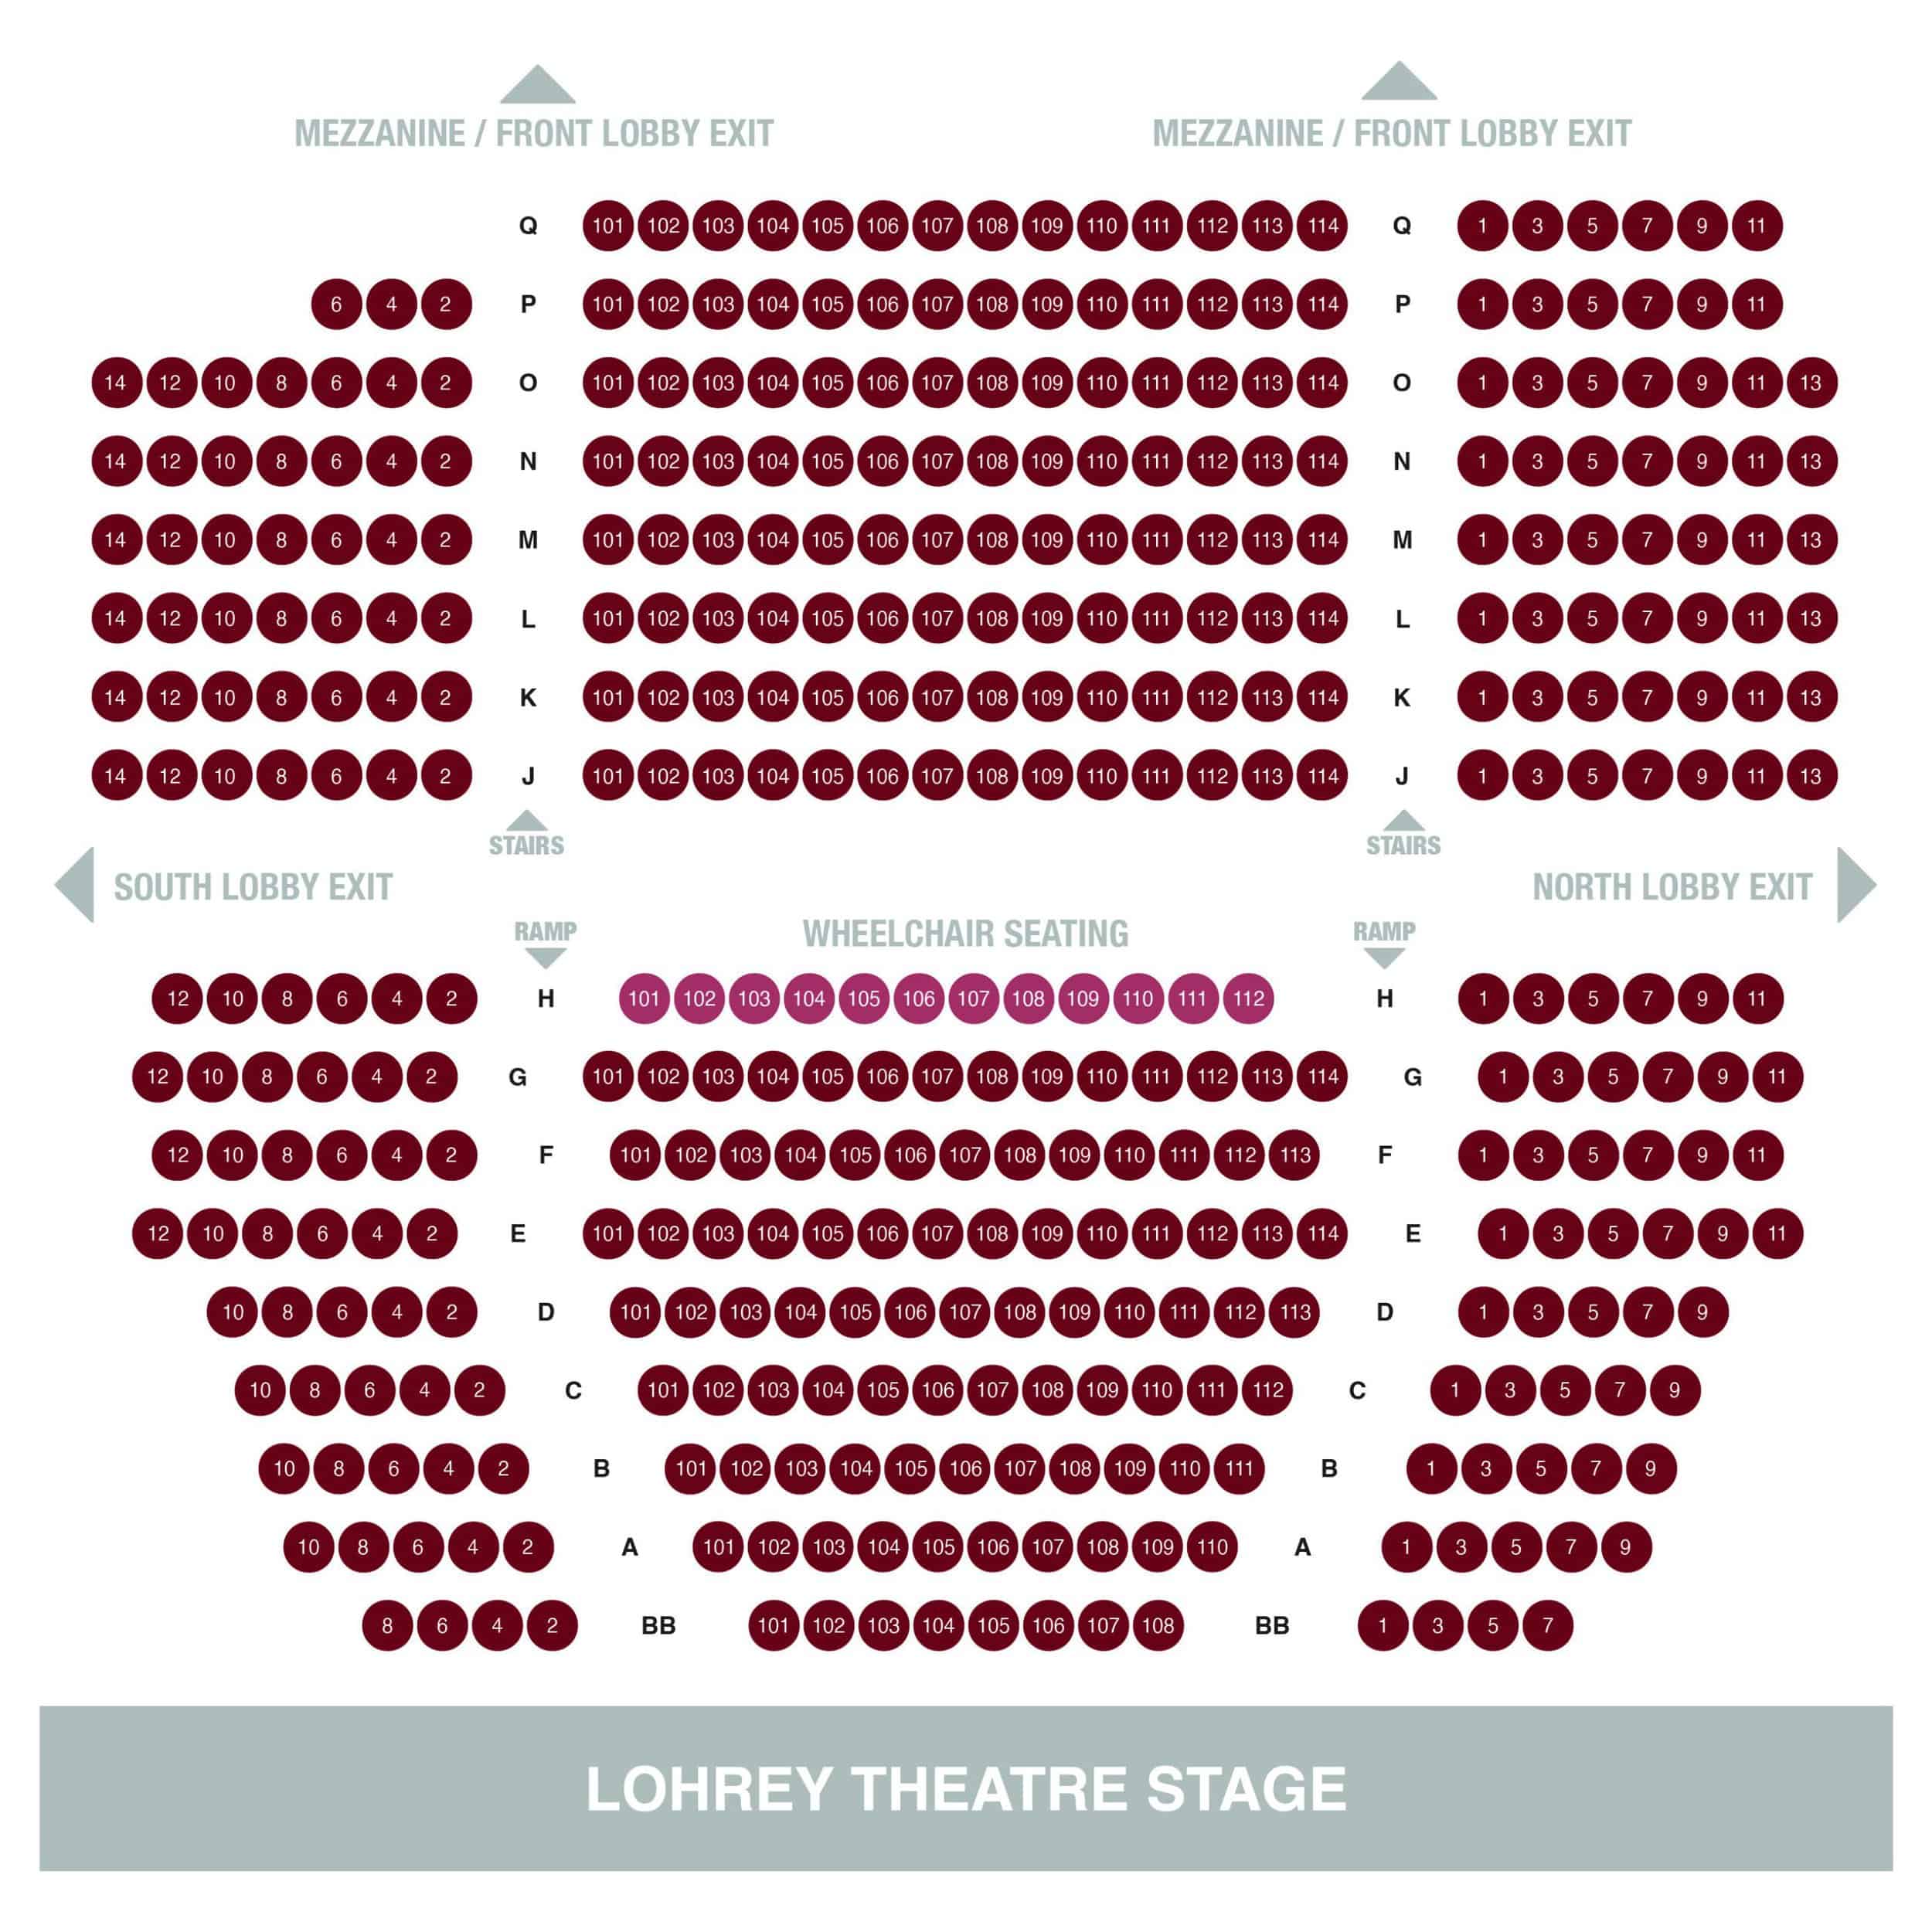 Lohrey Stage Seating Chart